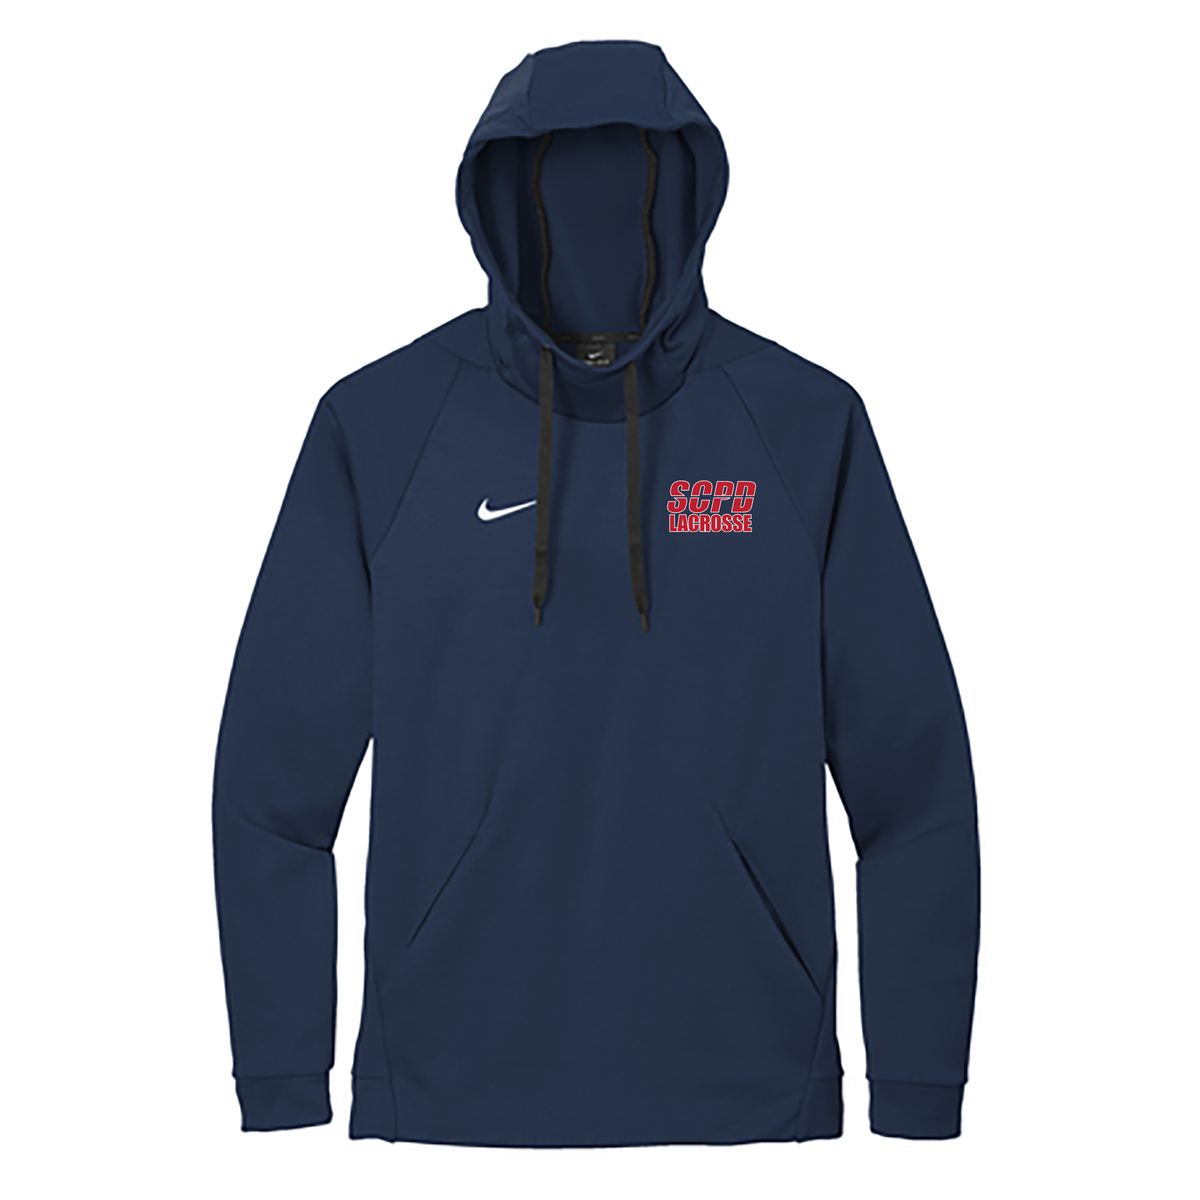 SCPD Lacrosse Nike Therma-FIT Embroidered Hoodie